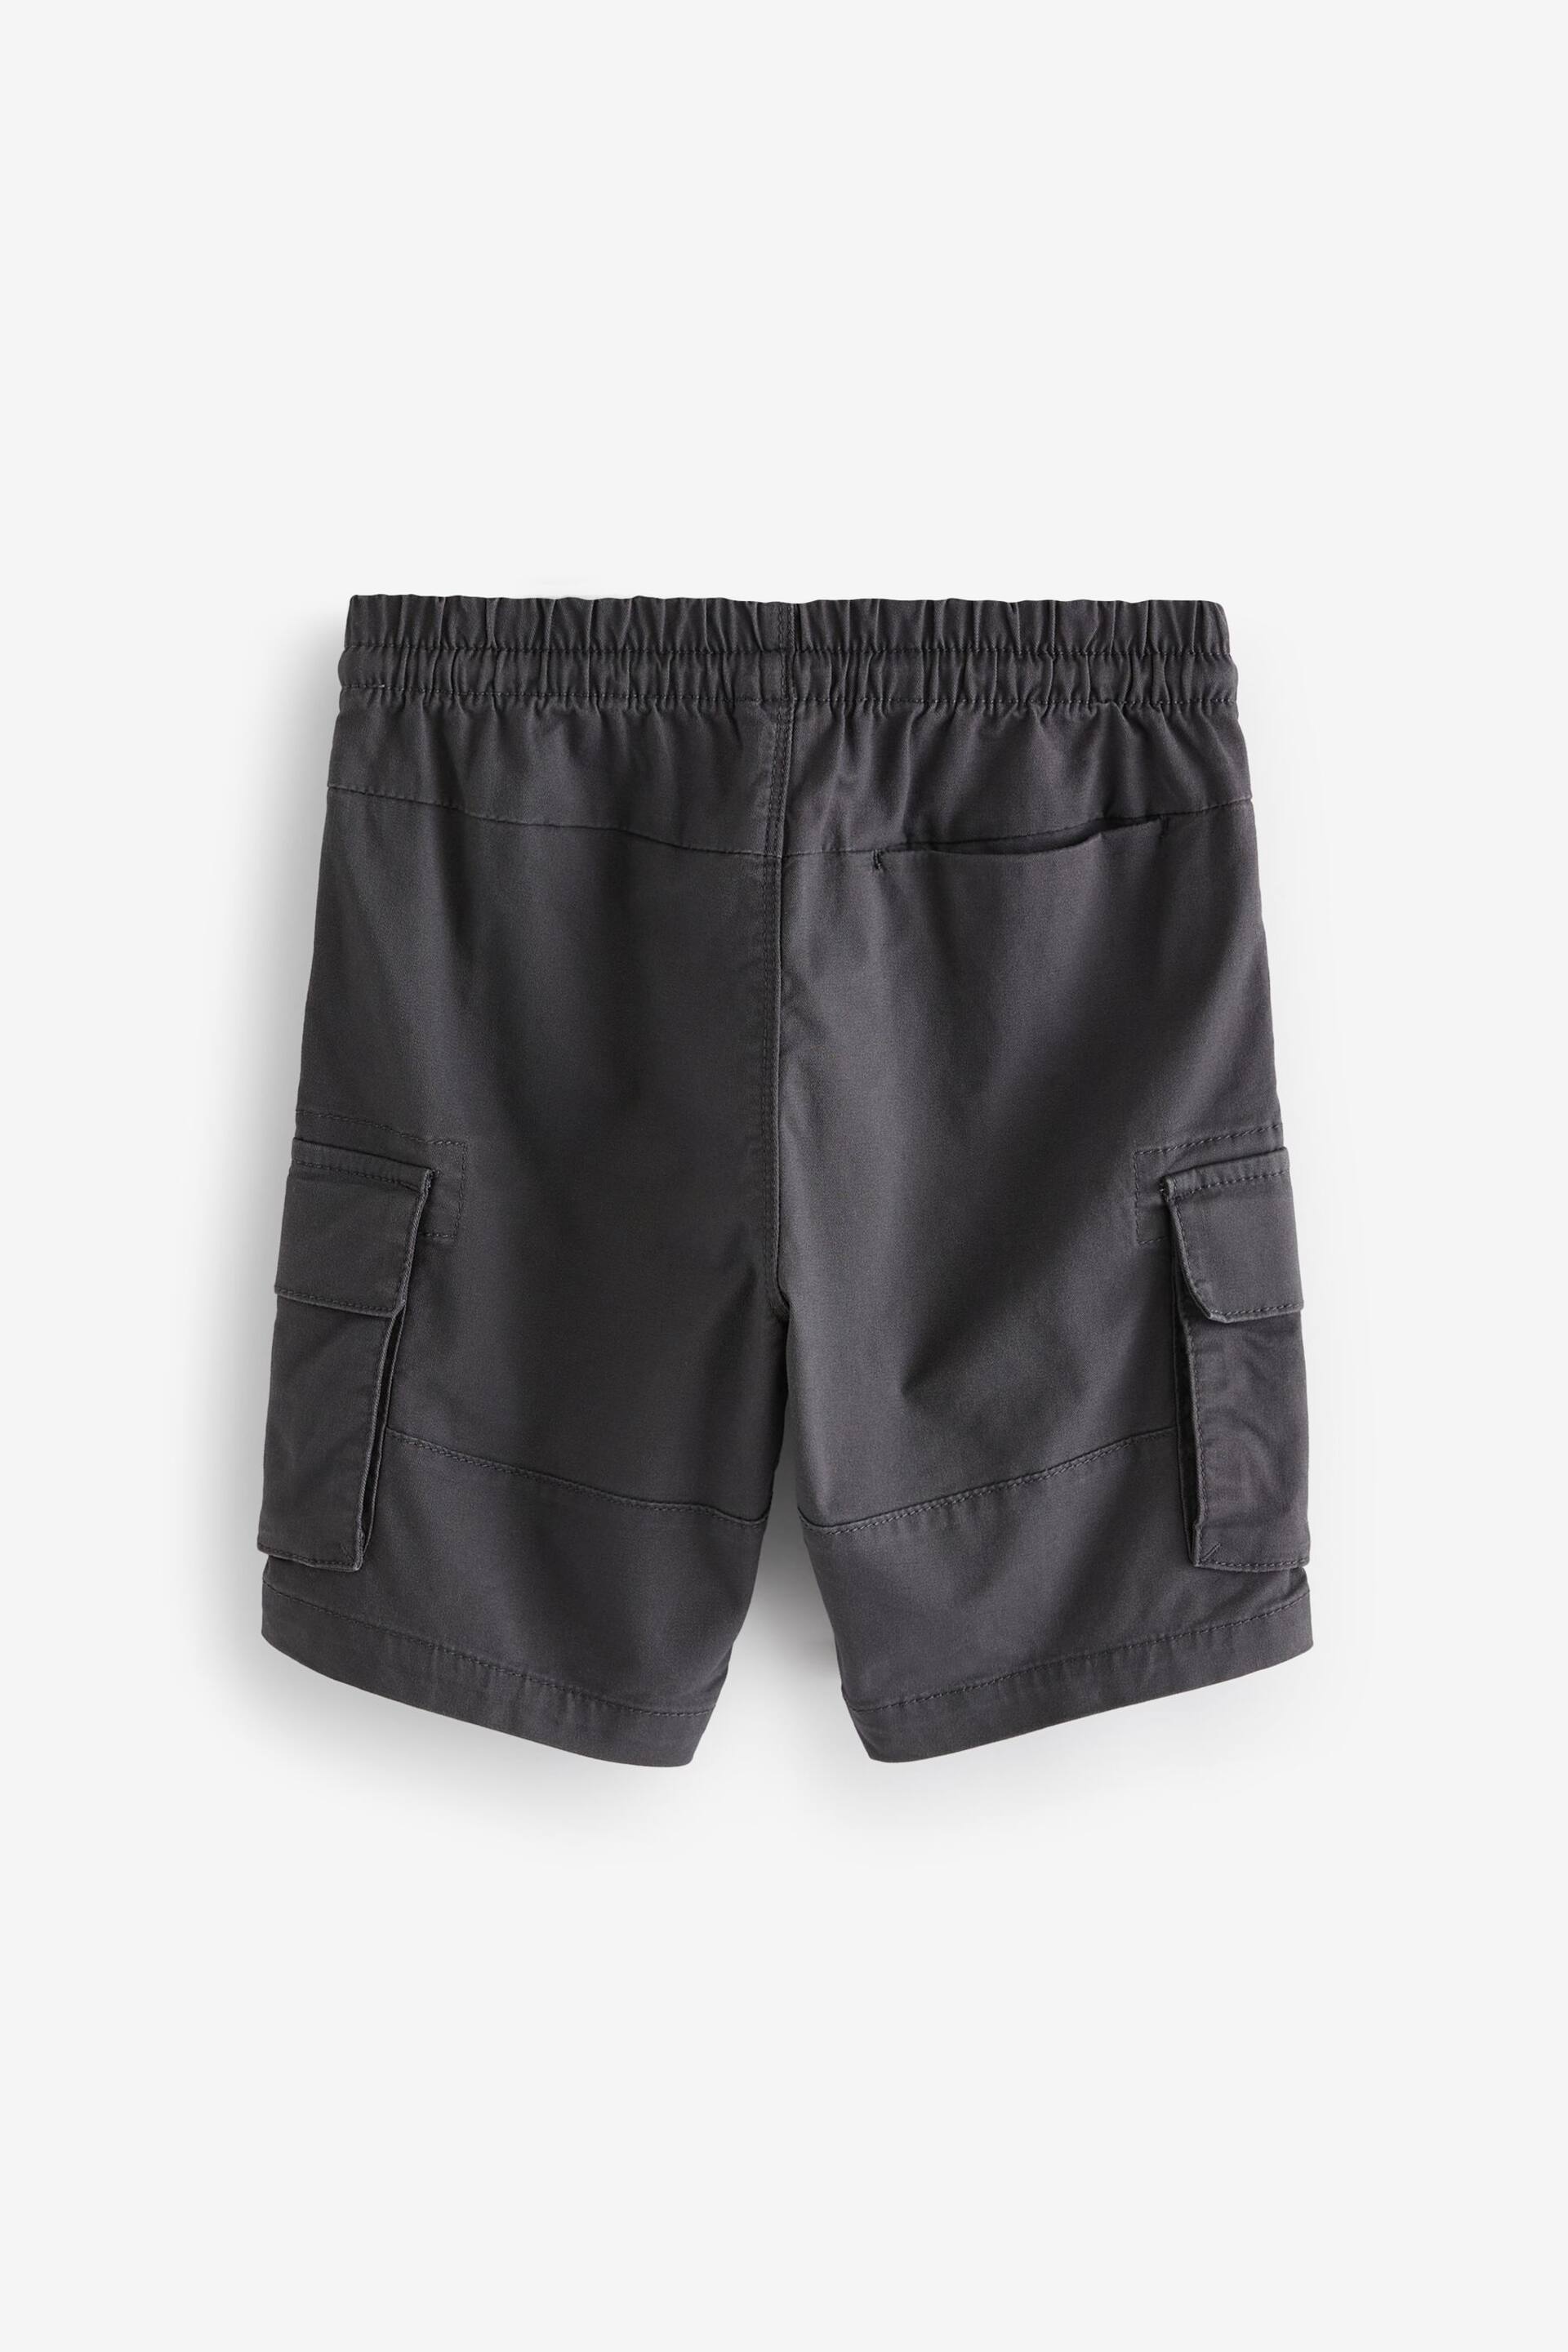 Charcoal Grey/Stone Cargo Shorts 2 Pack (3-16yrs) - Image 2 of 4